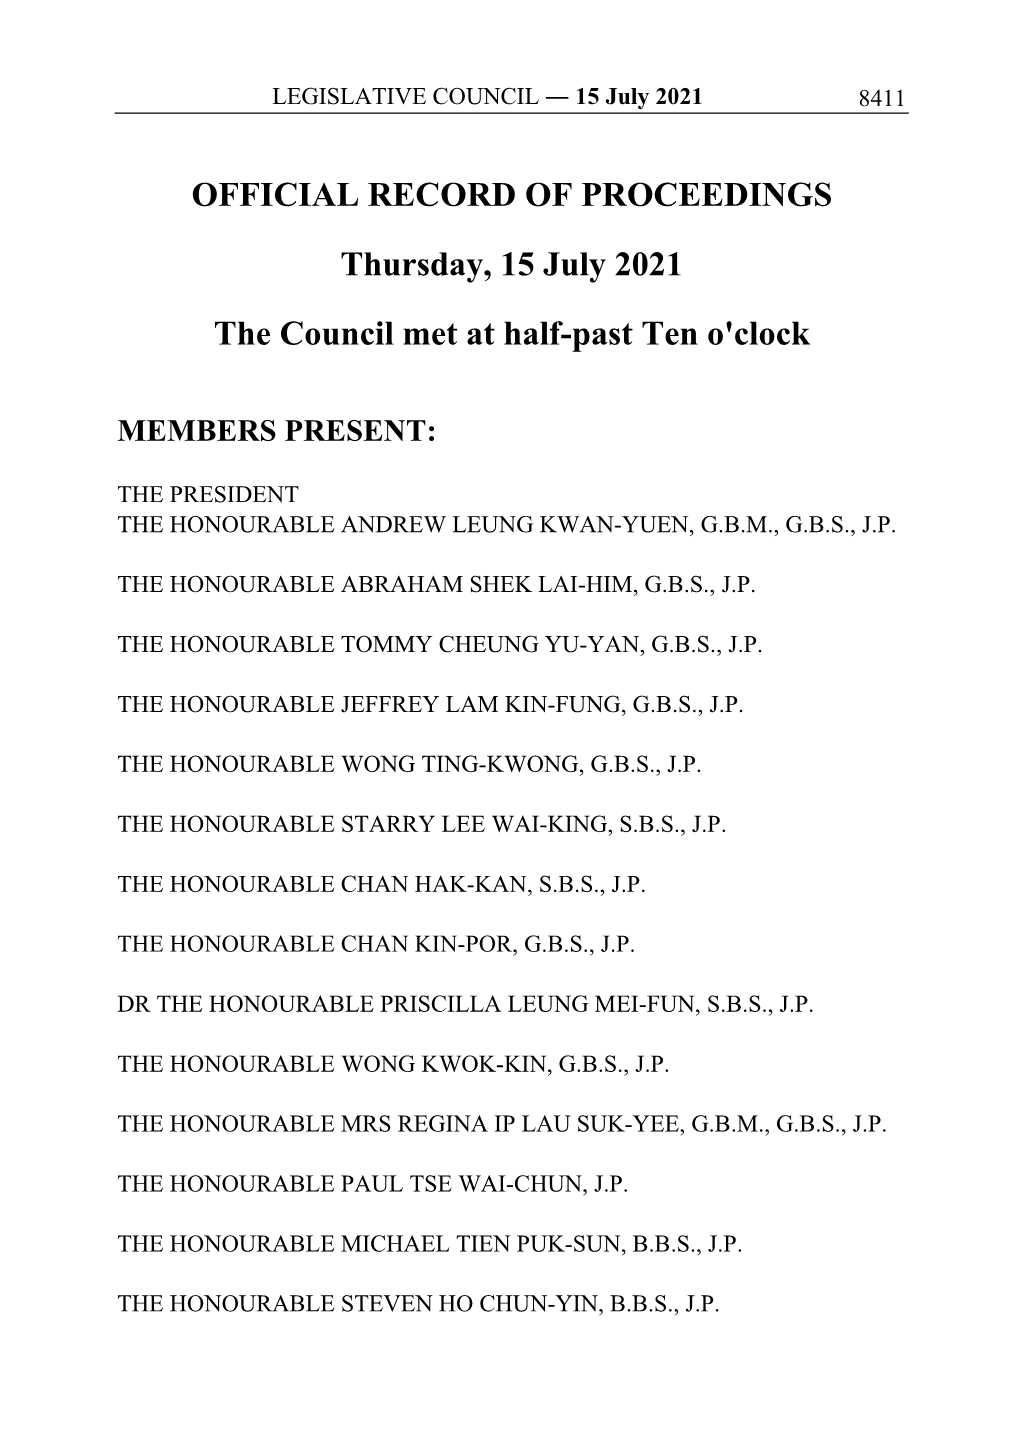 OFFICIAL RECORD of PROCEEDINGS Thursday, 15 July